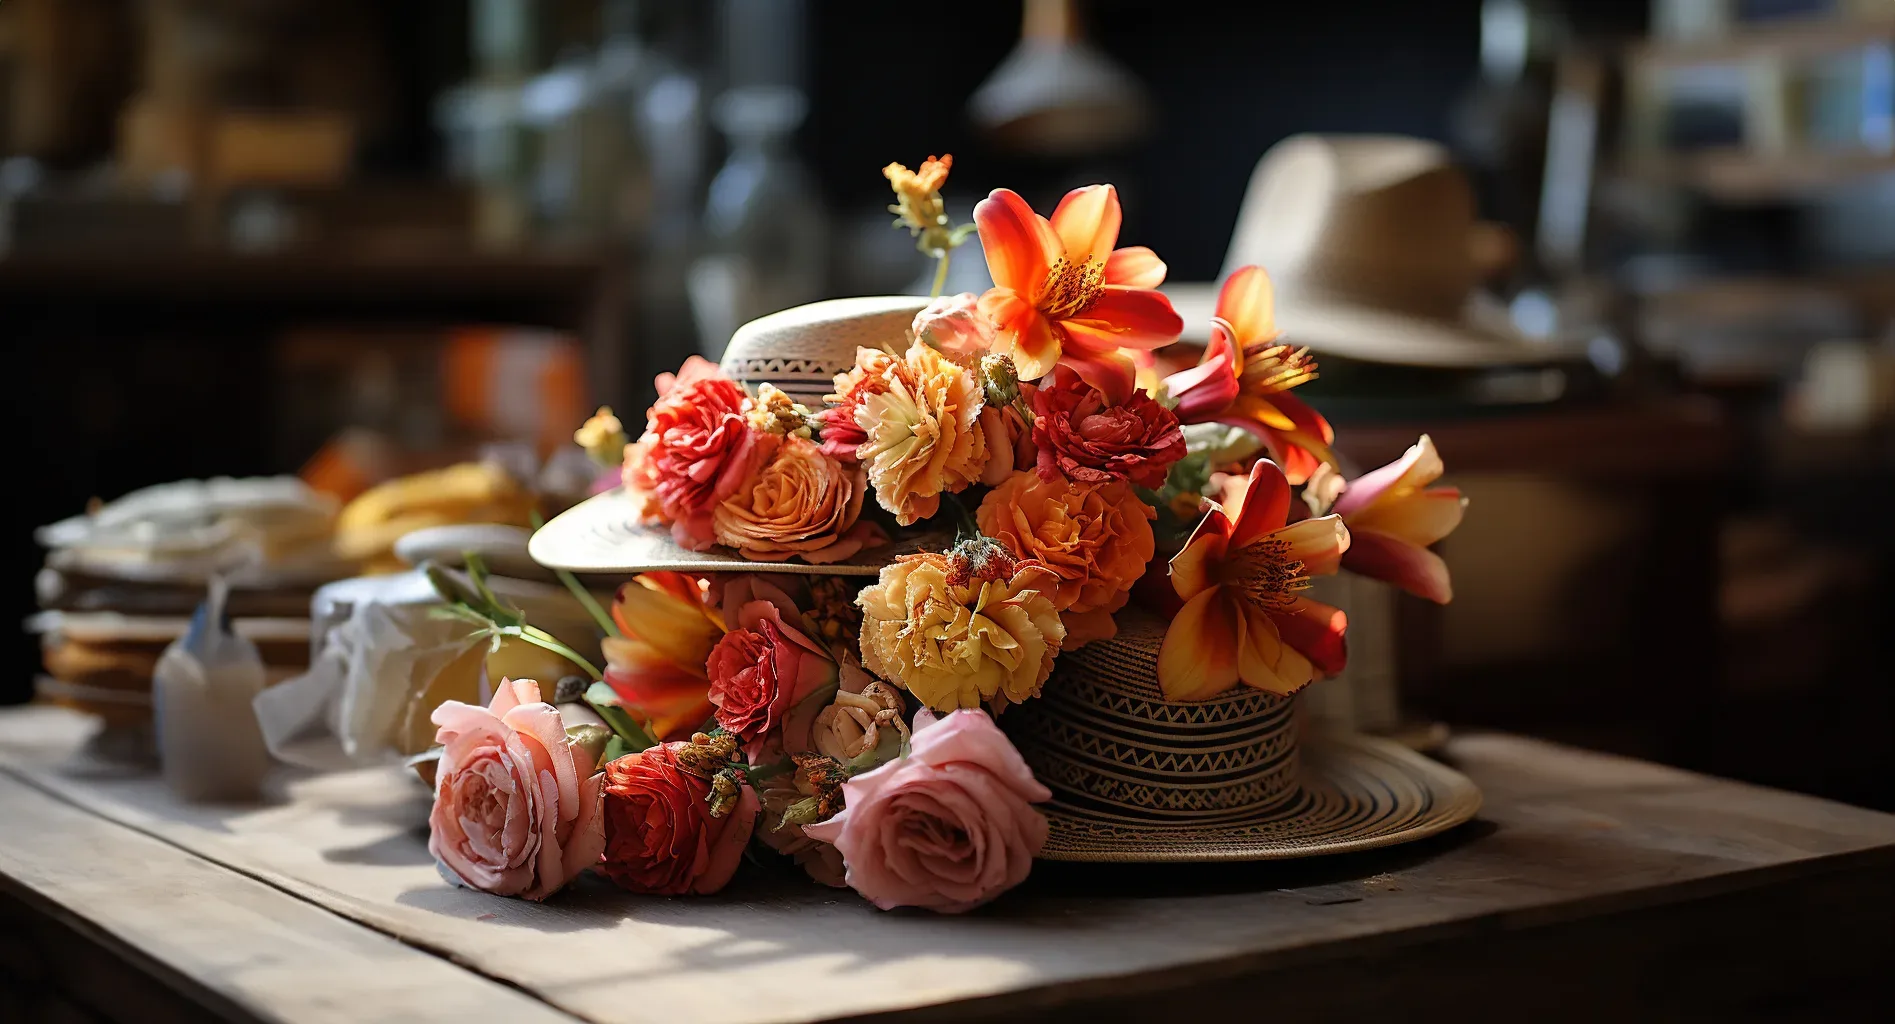 Hats and flowers on a wooden table.Wedding Budgets and costs